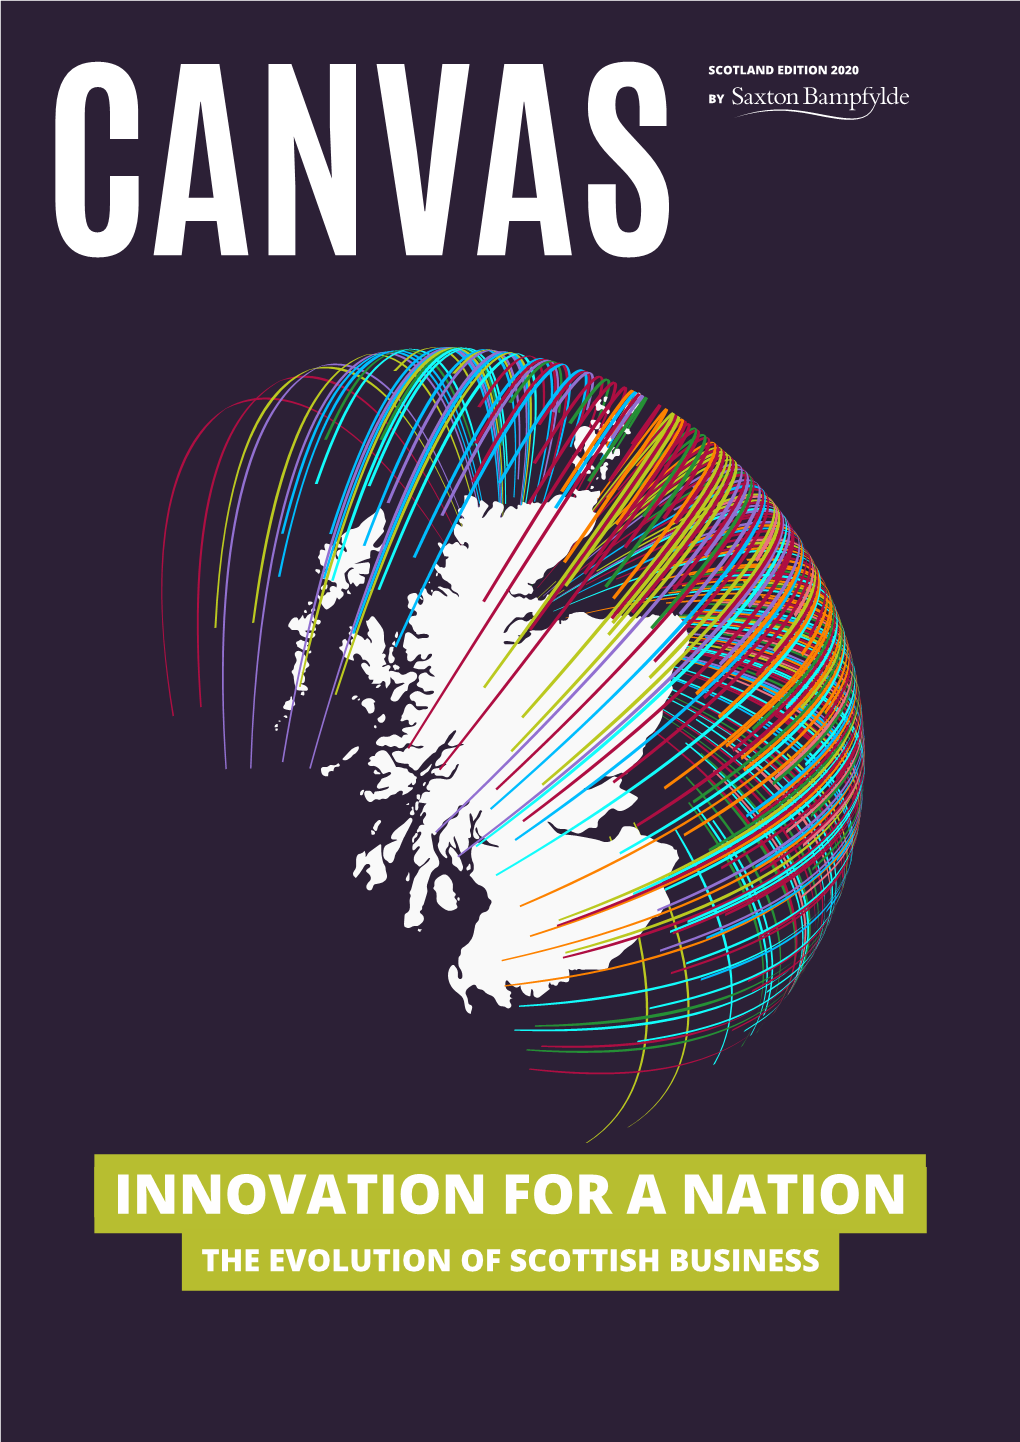 Innovation for a Nation the Evolution of Scottish Business Canvas Scotland Edition by Saxton Bampfylde Welcome